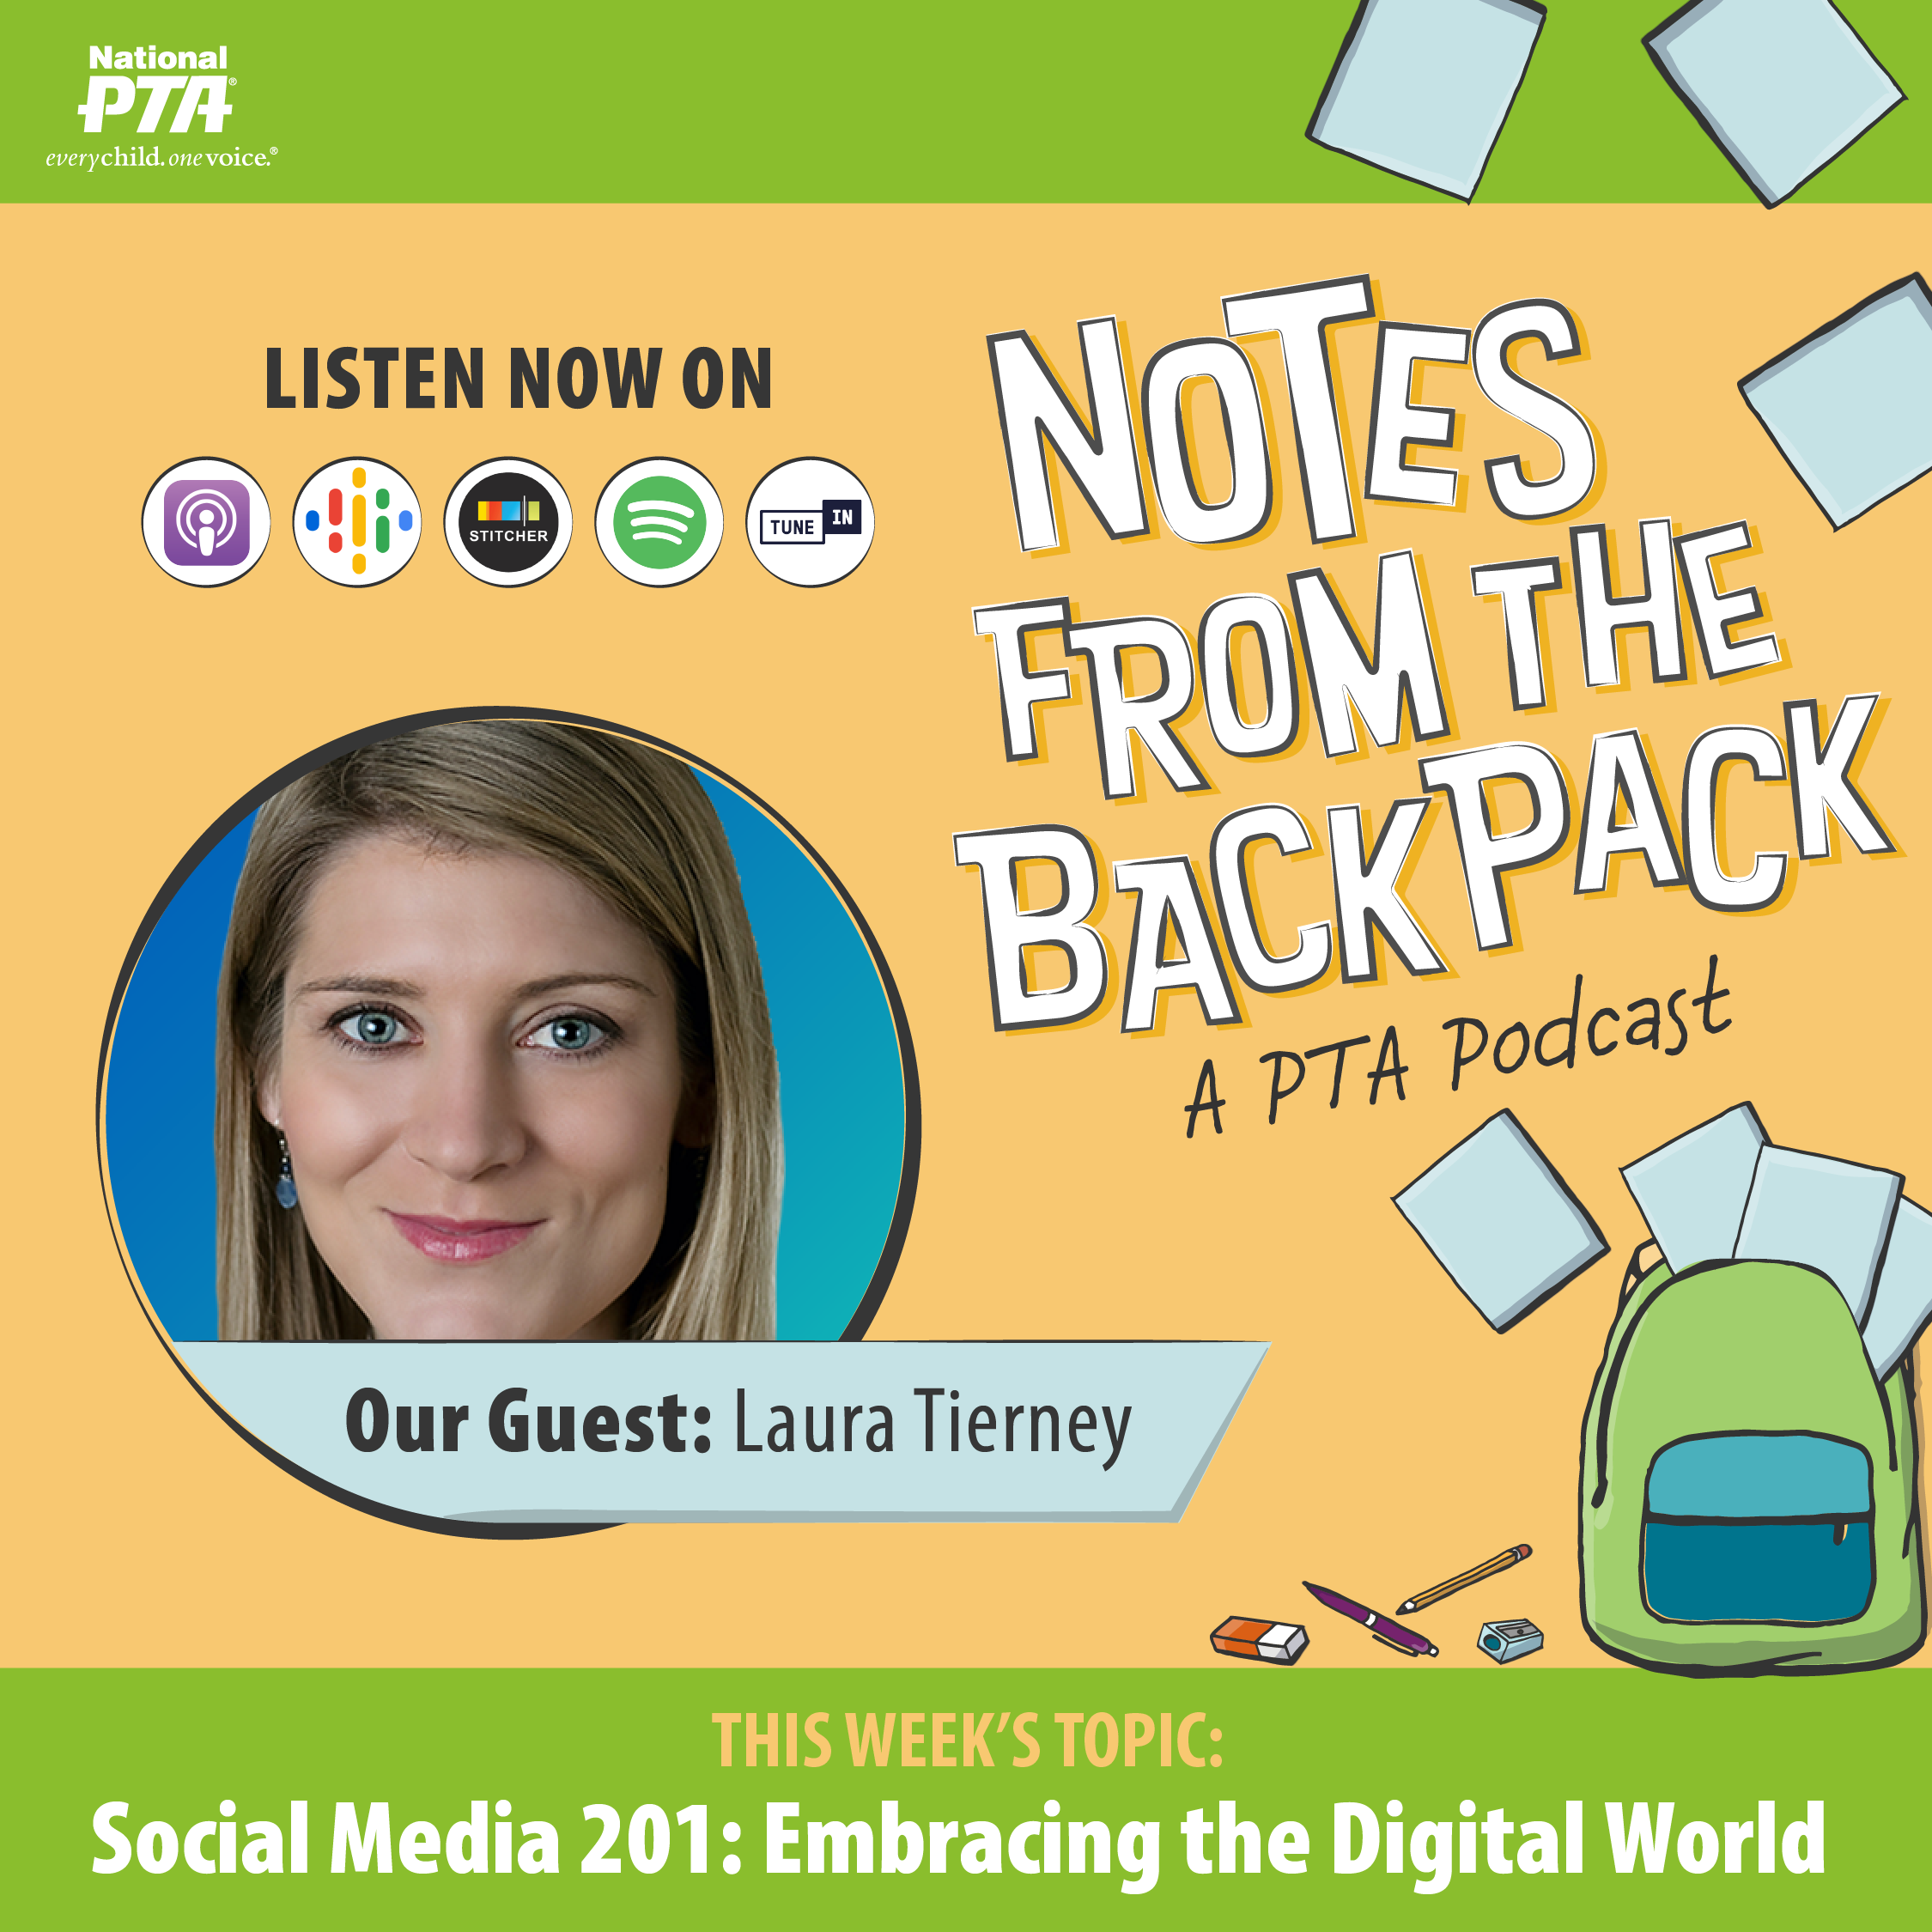 Artwork for podcast Notes from the Backpack: A PTA Podcast